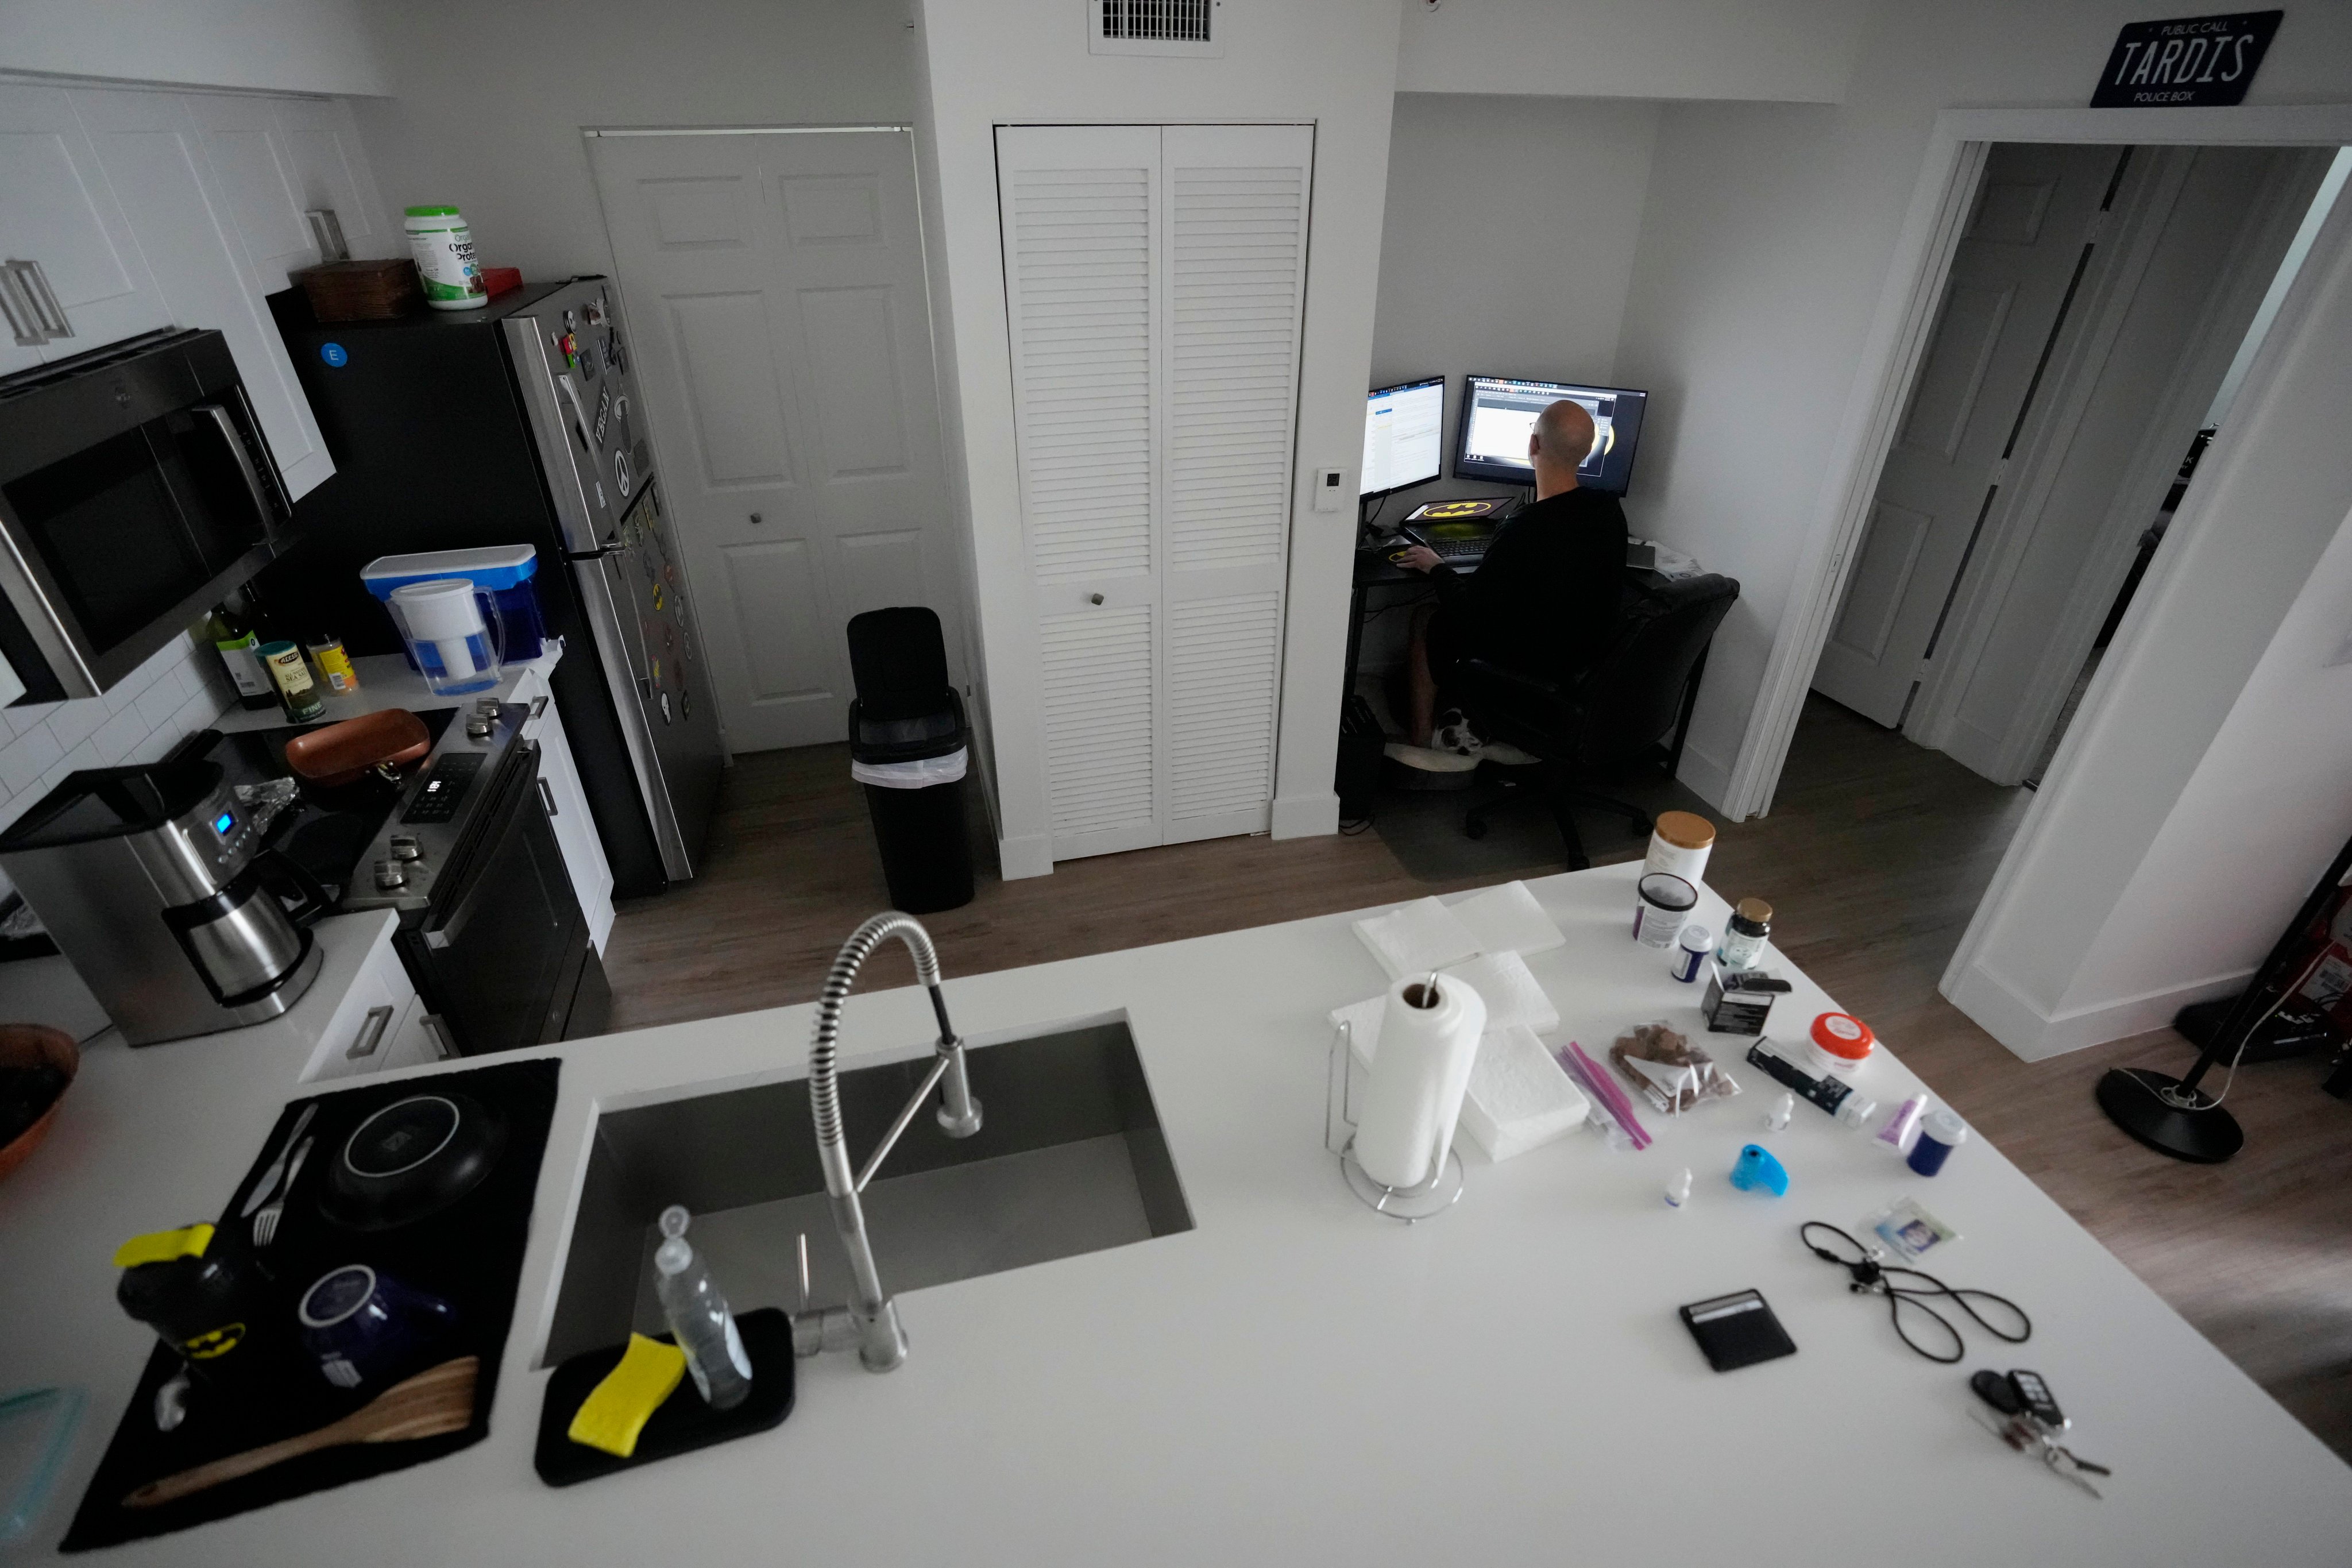 Web designer Joey Di Girolamo works at a desk in a kitchen nook at his flat in Pembroke Pines, Florida, on July 20. Remote working’s popularity among employees has endured beyond the Covid-19 pandemic despite employers beginning to crack down and insisting on workers being physically present in the office. Photo: AP